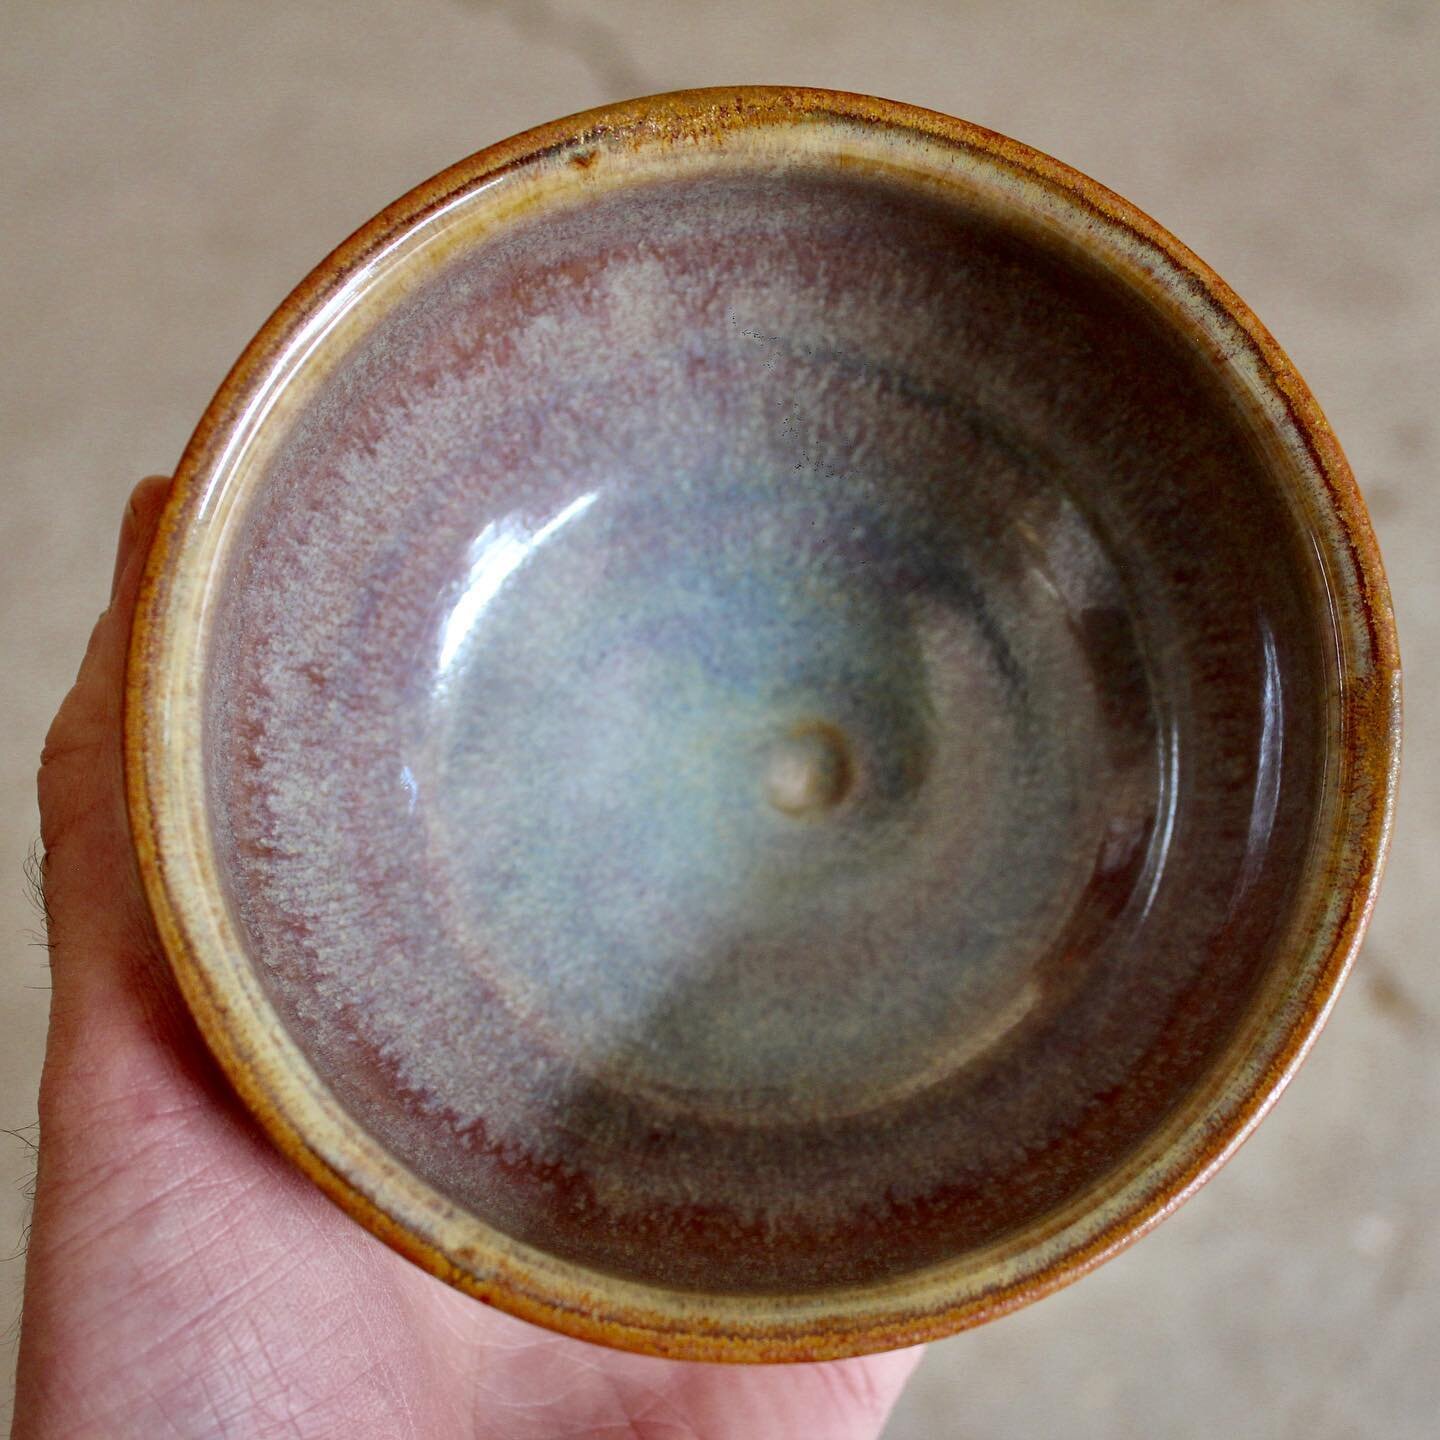 I just plopped this new Blue Amber tea bowl onto the Suga Pottery website. You can find it living in the TEAWARE section if you do a little clicking. 

If you&rsquo;d rather it live with you, enter WSB at checkout and you&rsquo;ll get 15% off of this